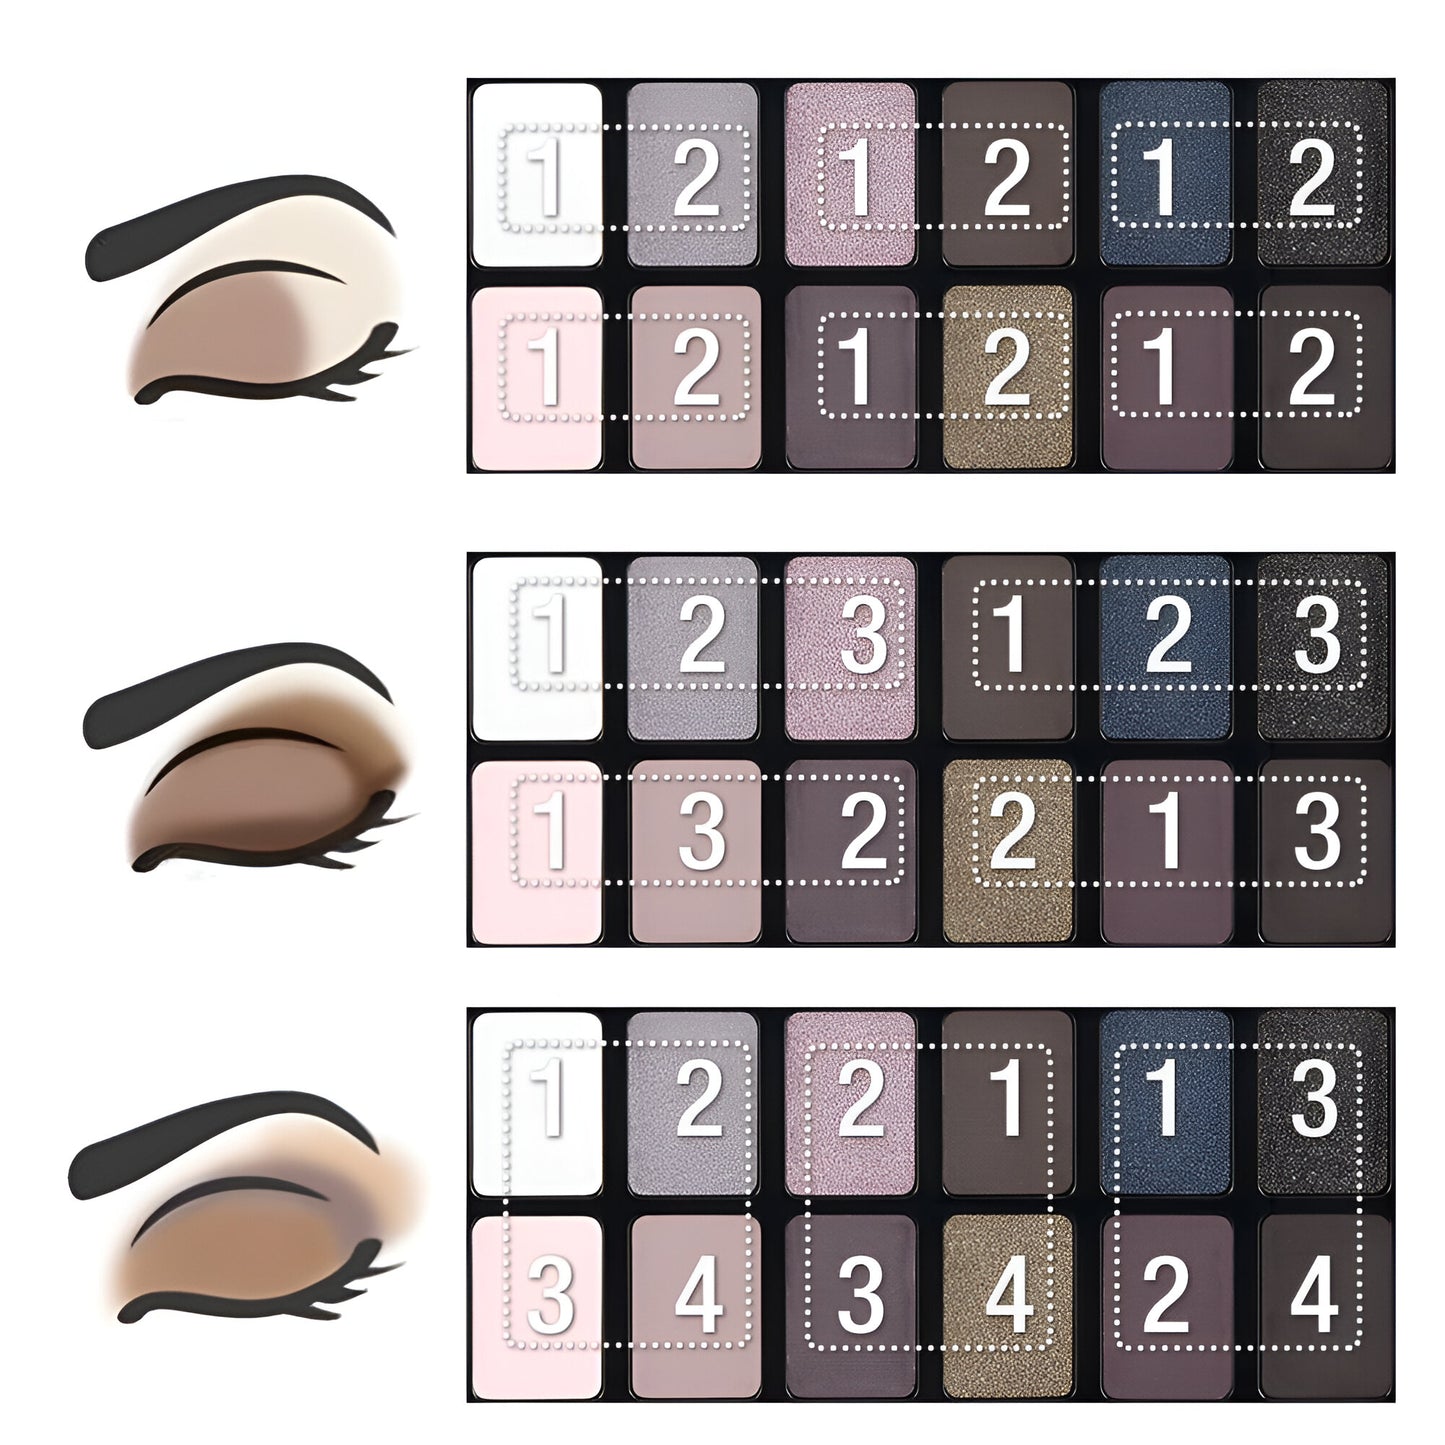 Maybelline New York The Rock Nudes Paleta - 12 colores